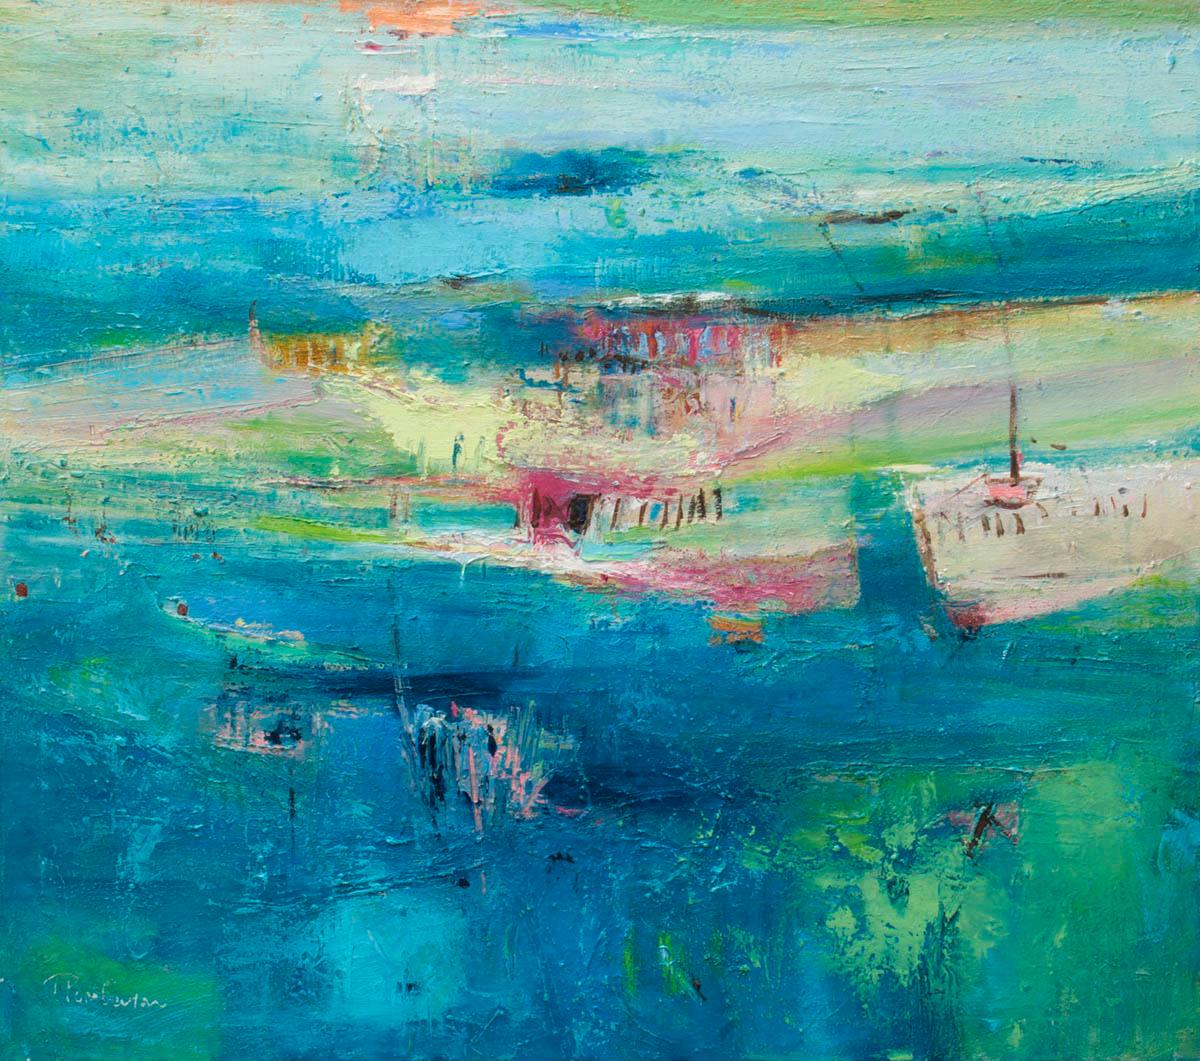 Teresa Pemberton Abstract Painting - Watching the Tide large contemporary abstract painting for sale, blue sea  